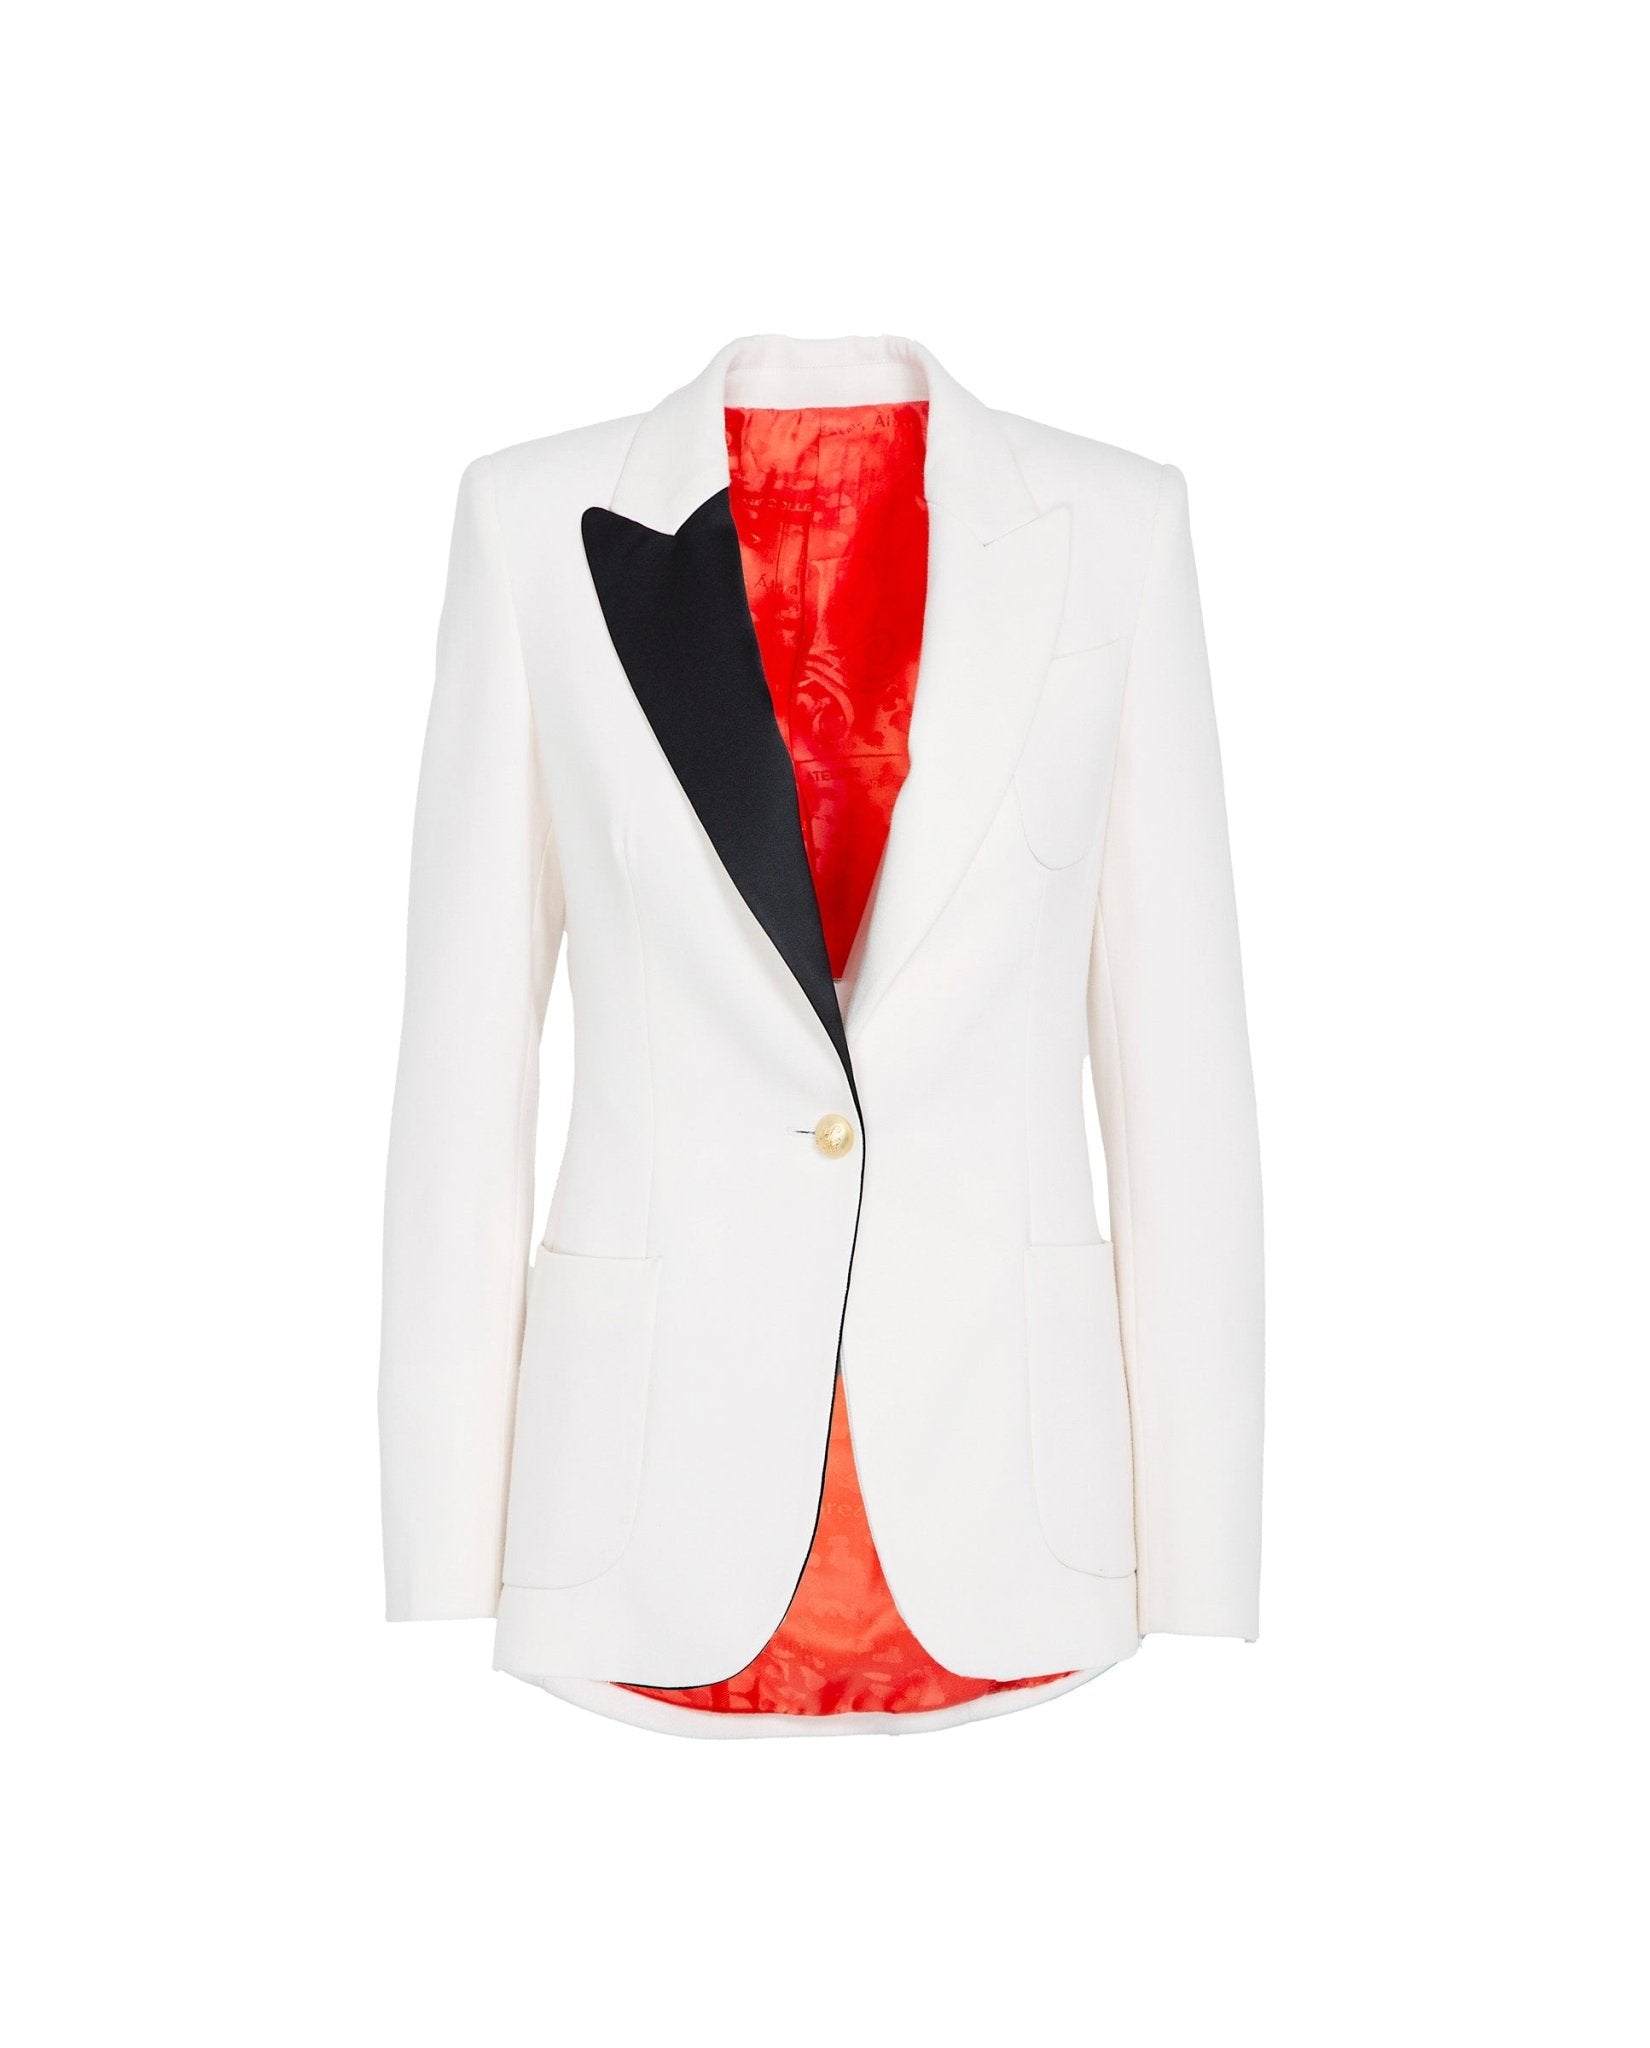 BLAZER BLANCO ESMOQUIN RUE ROSIERS - THE EXTREME COLLECTION